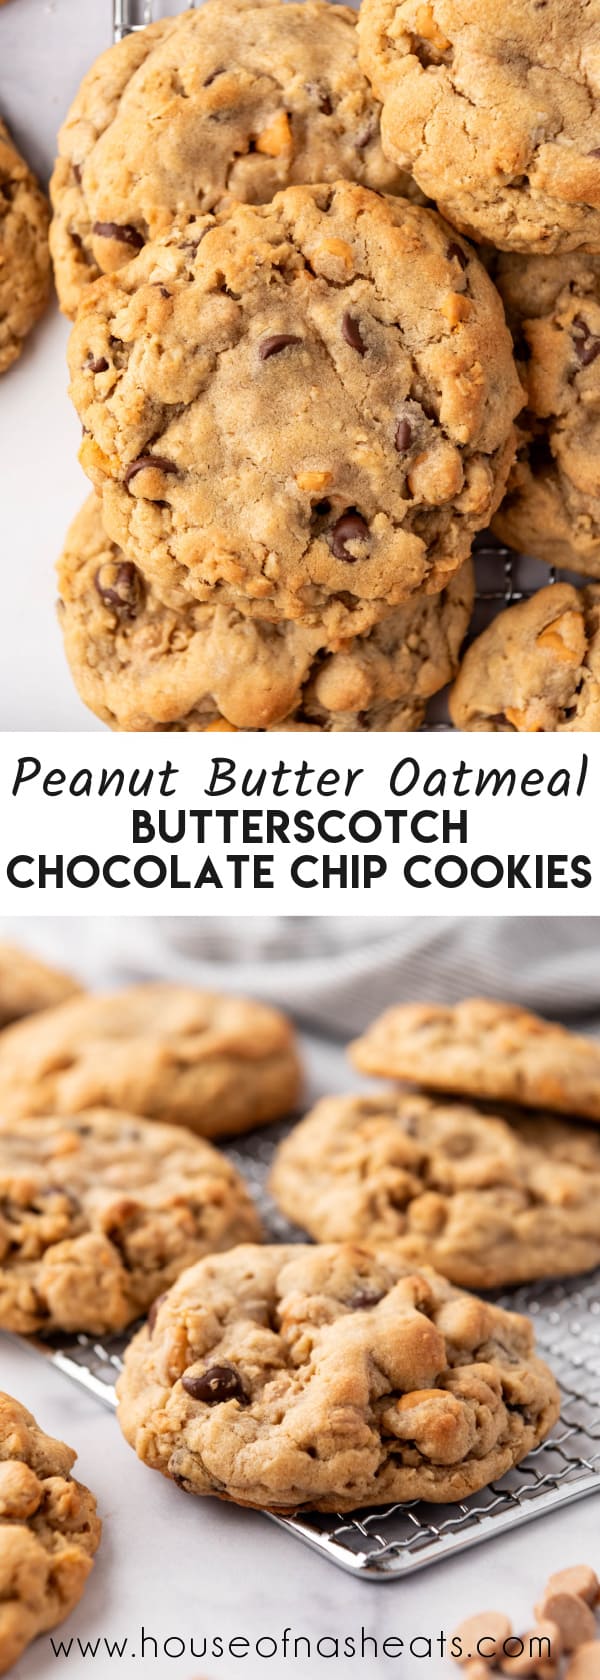 A collage of images of peanut butter oatmeal butterscotch chocolate chip cookies with text overlay.